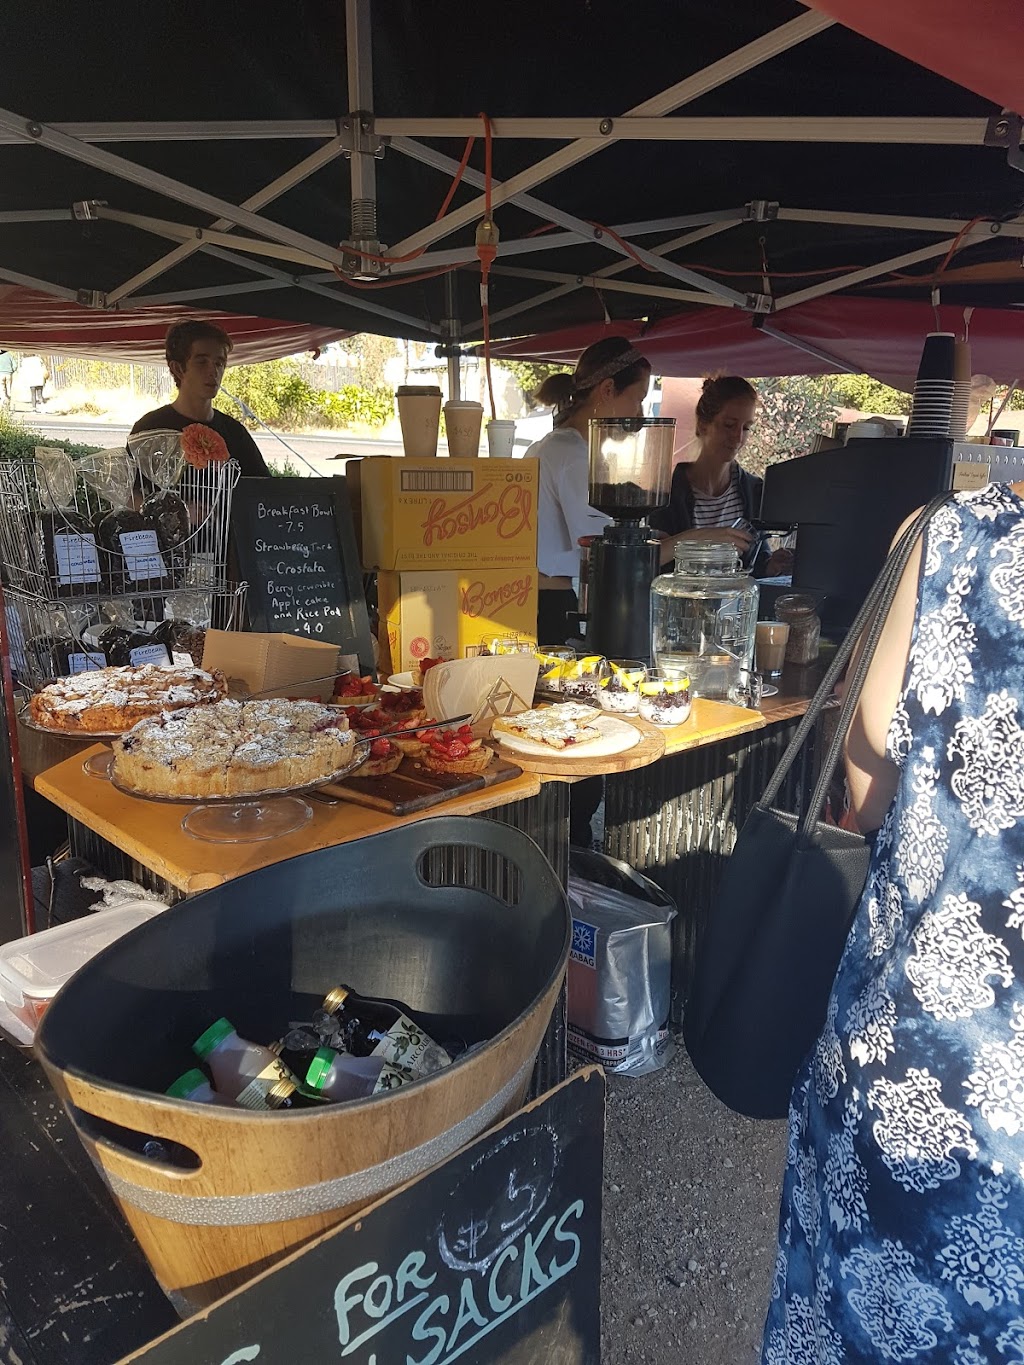 Wesley Hill Community Market |  | 149 Pyrenees Hwy, Castlemaine VIC 3450, Australia | 0418117953 OR +61 418 117 953